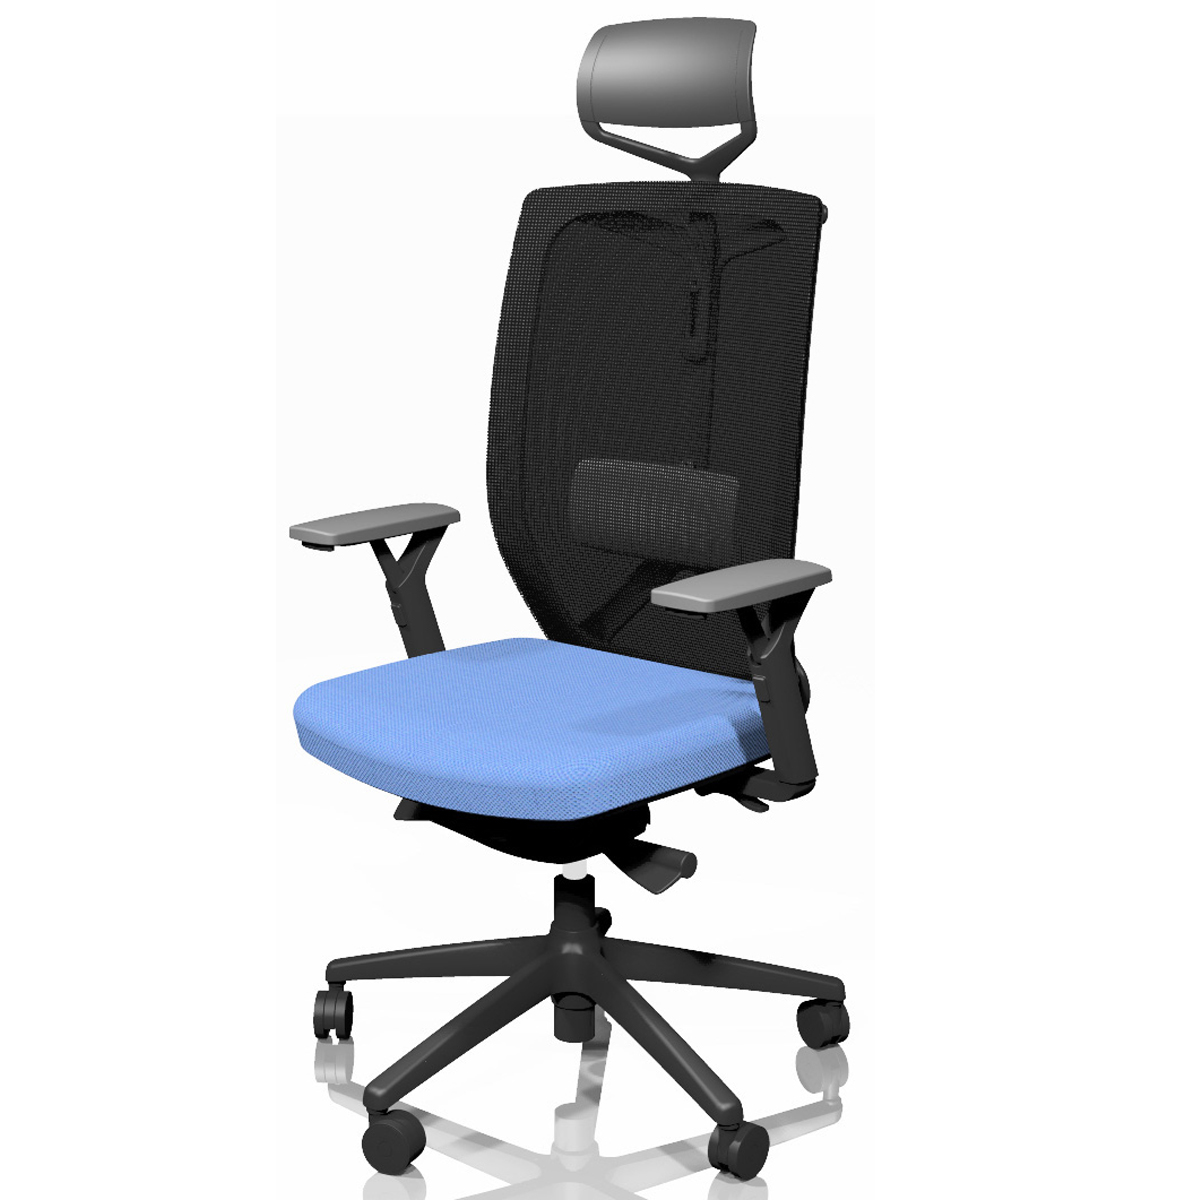 VOLO DIRECTOR CHAIR